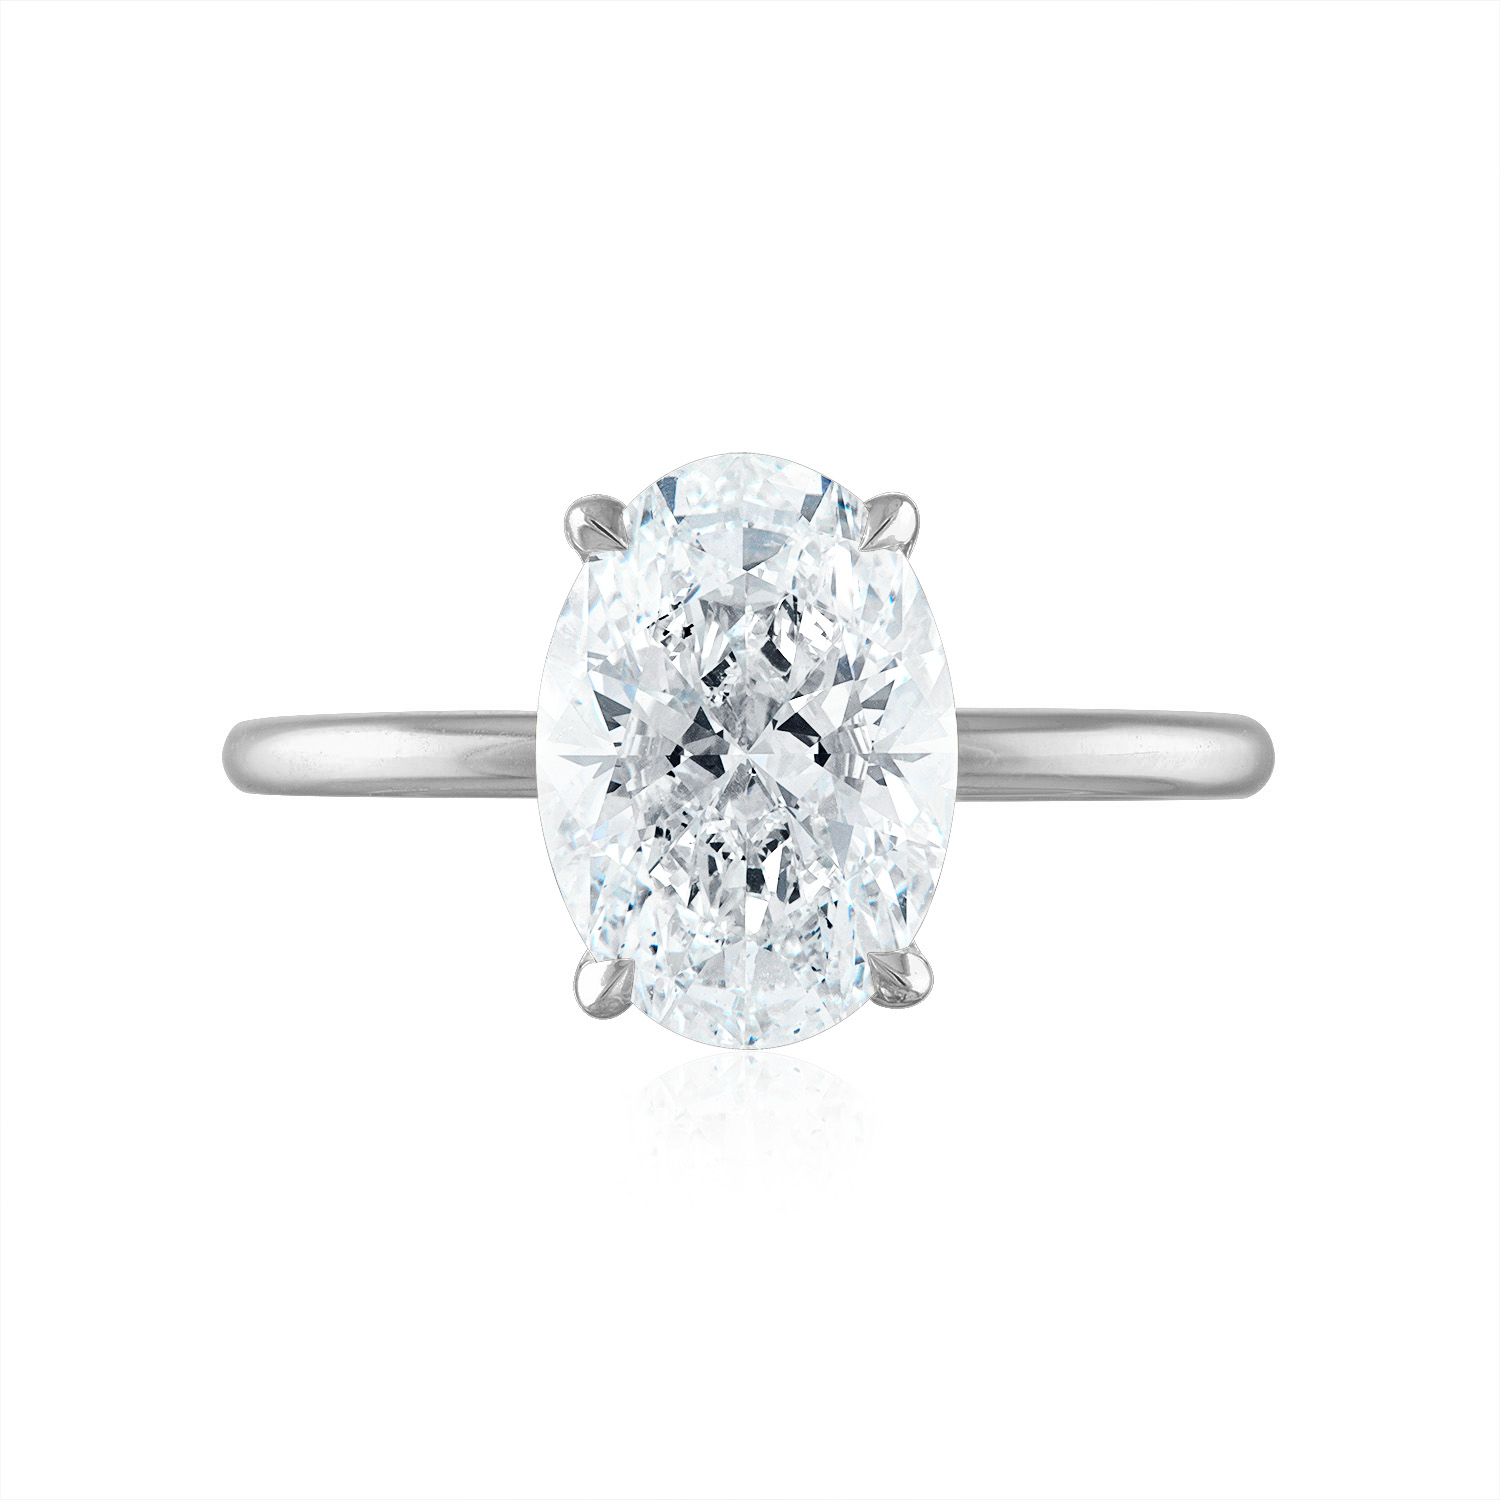 Oval Solitaire Engagement Ring in Platinum